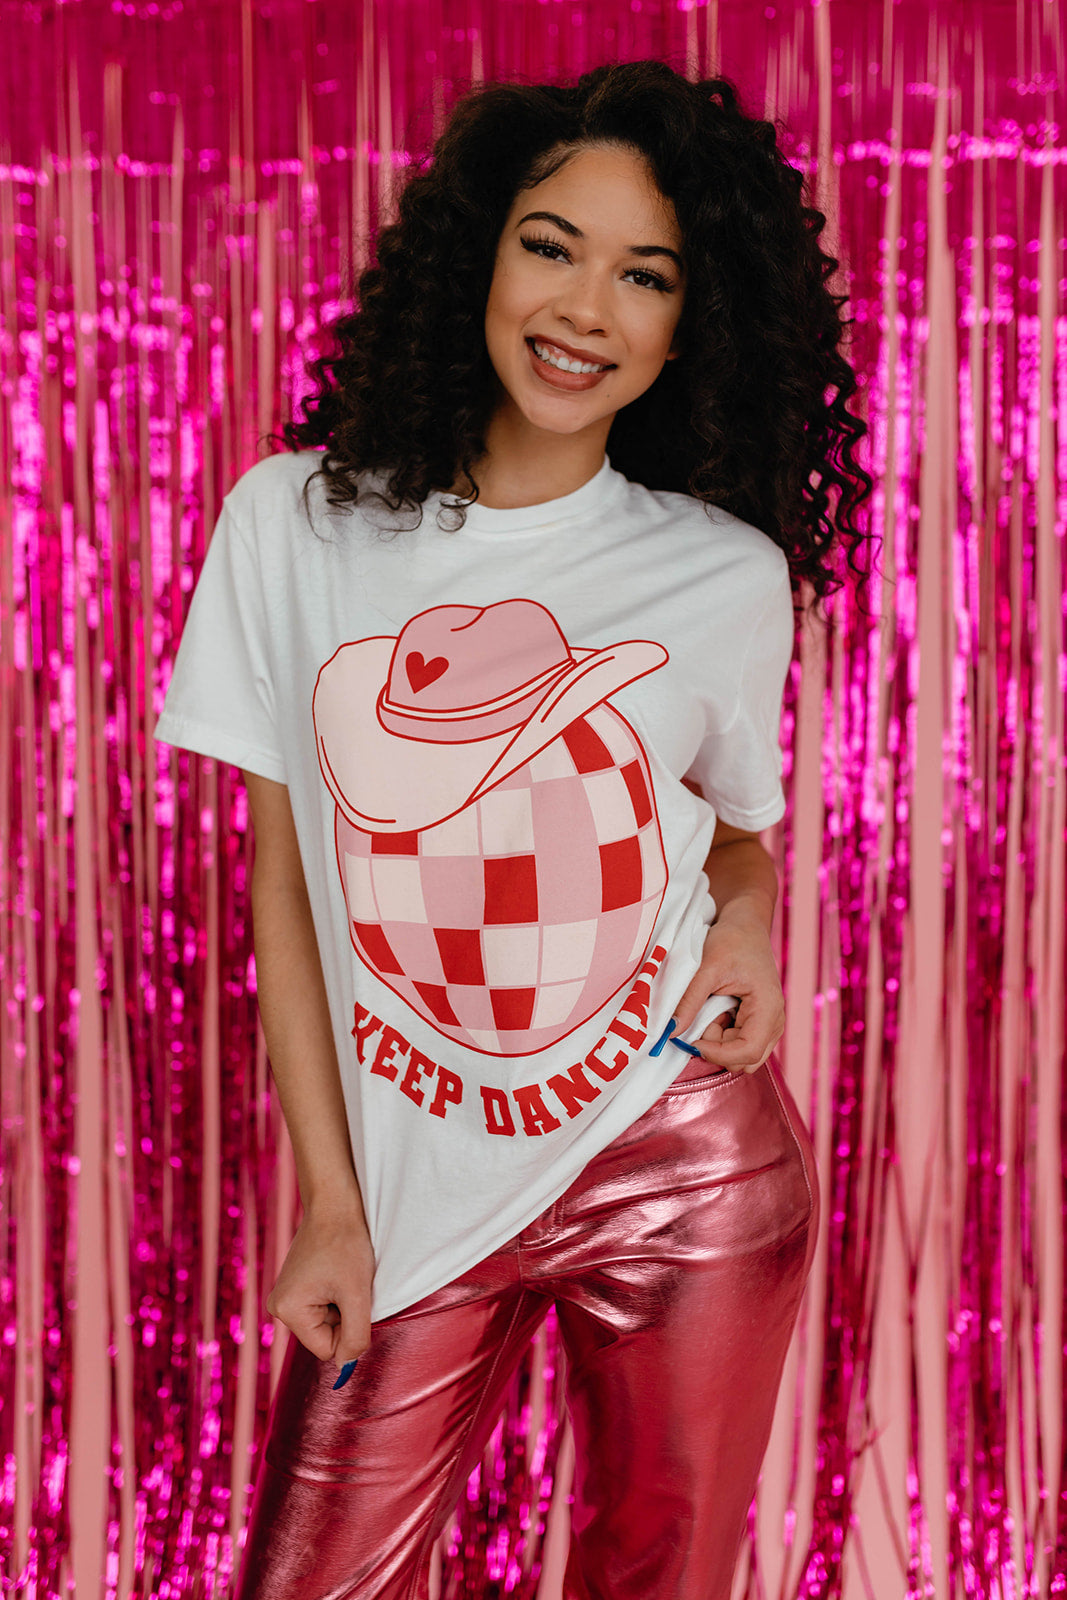 THE KEEP DANCING TEE IN WHITE BY PINK DESERT